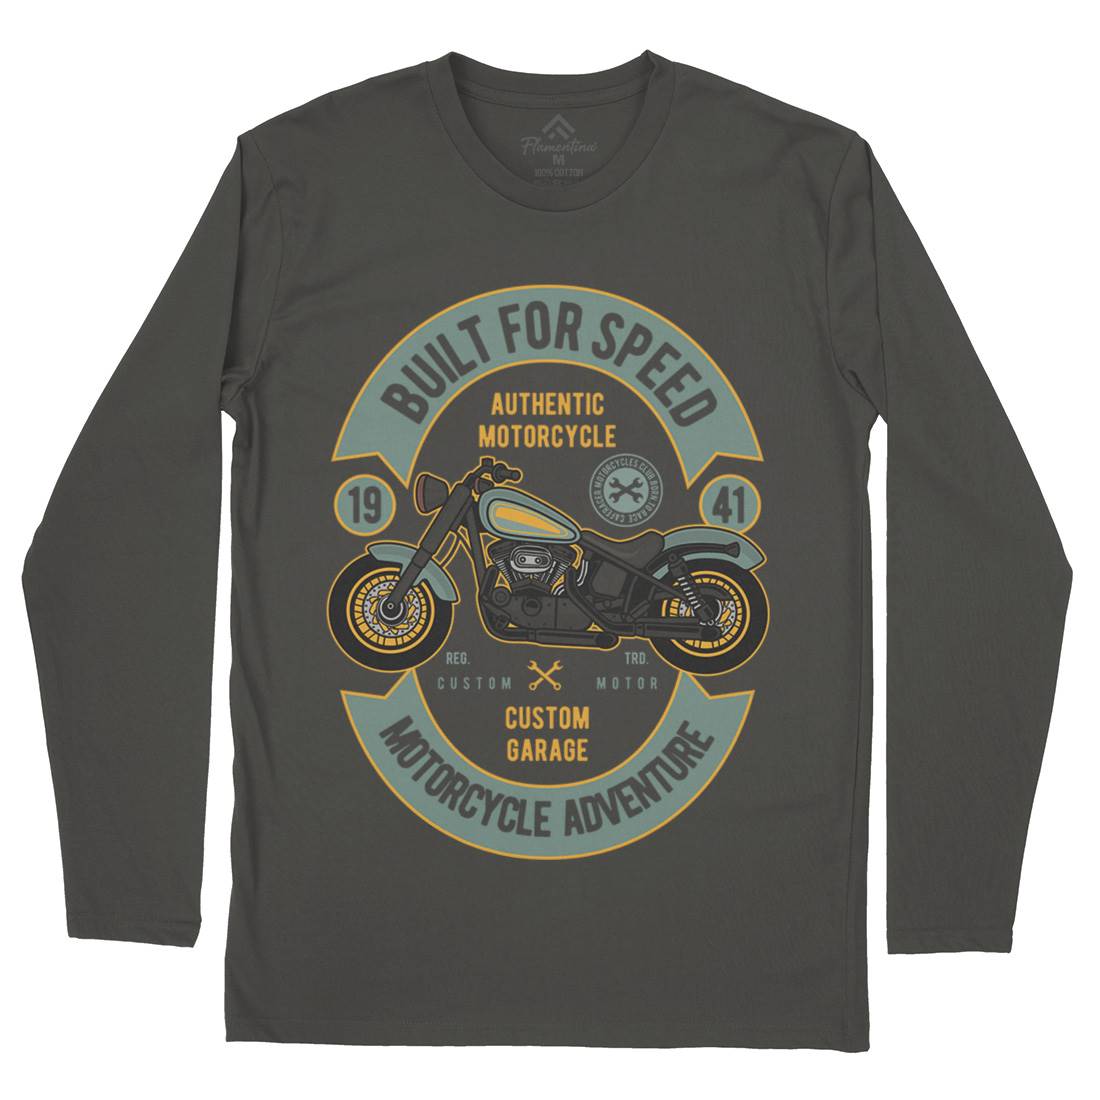 Built For Speed Mens Long Sleeve T-Shirt Motorcycles D512